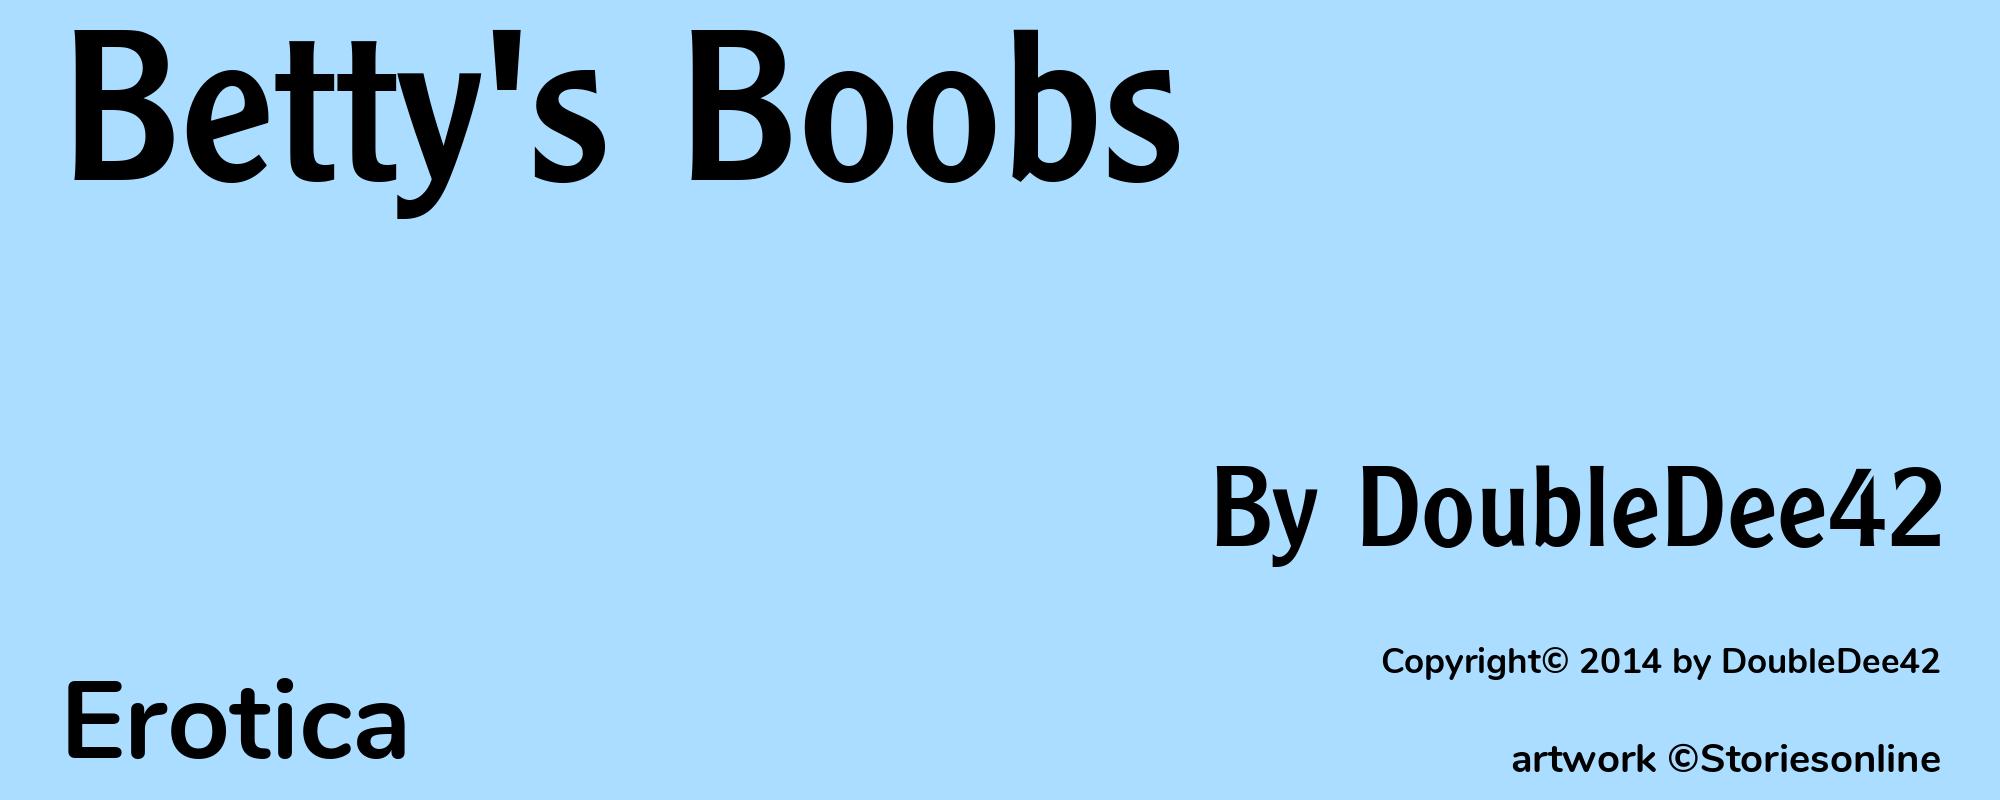 Betty's Boobs - Cover